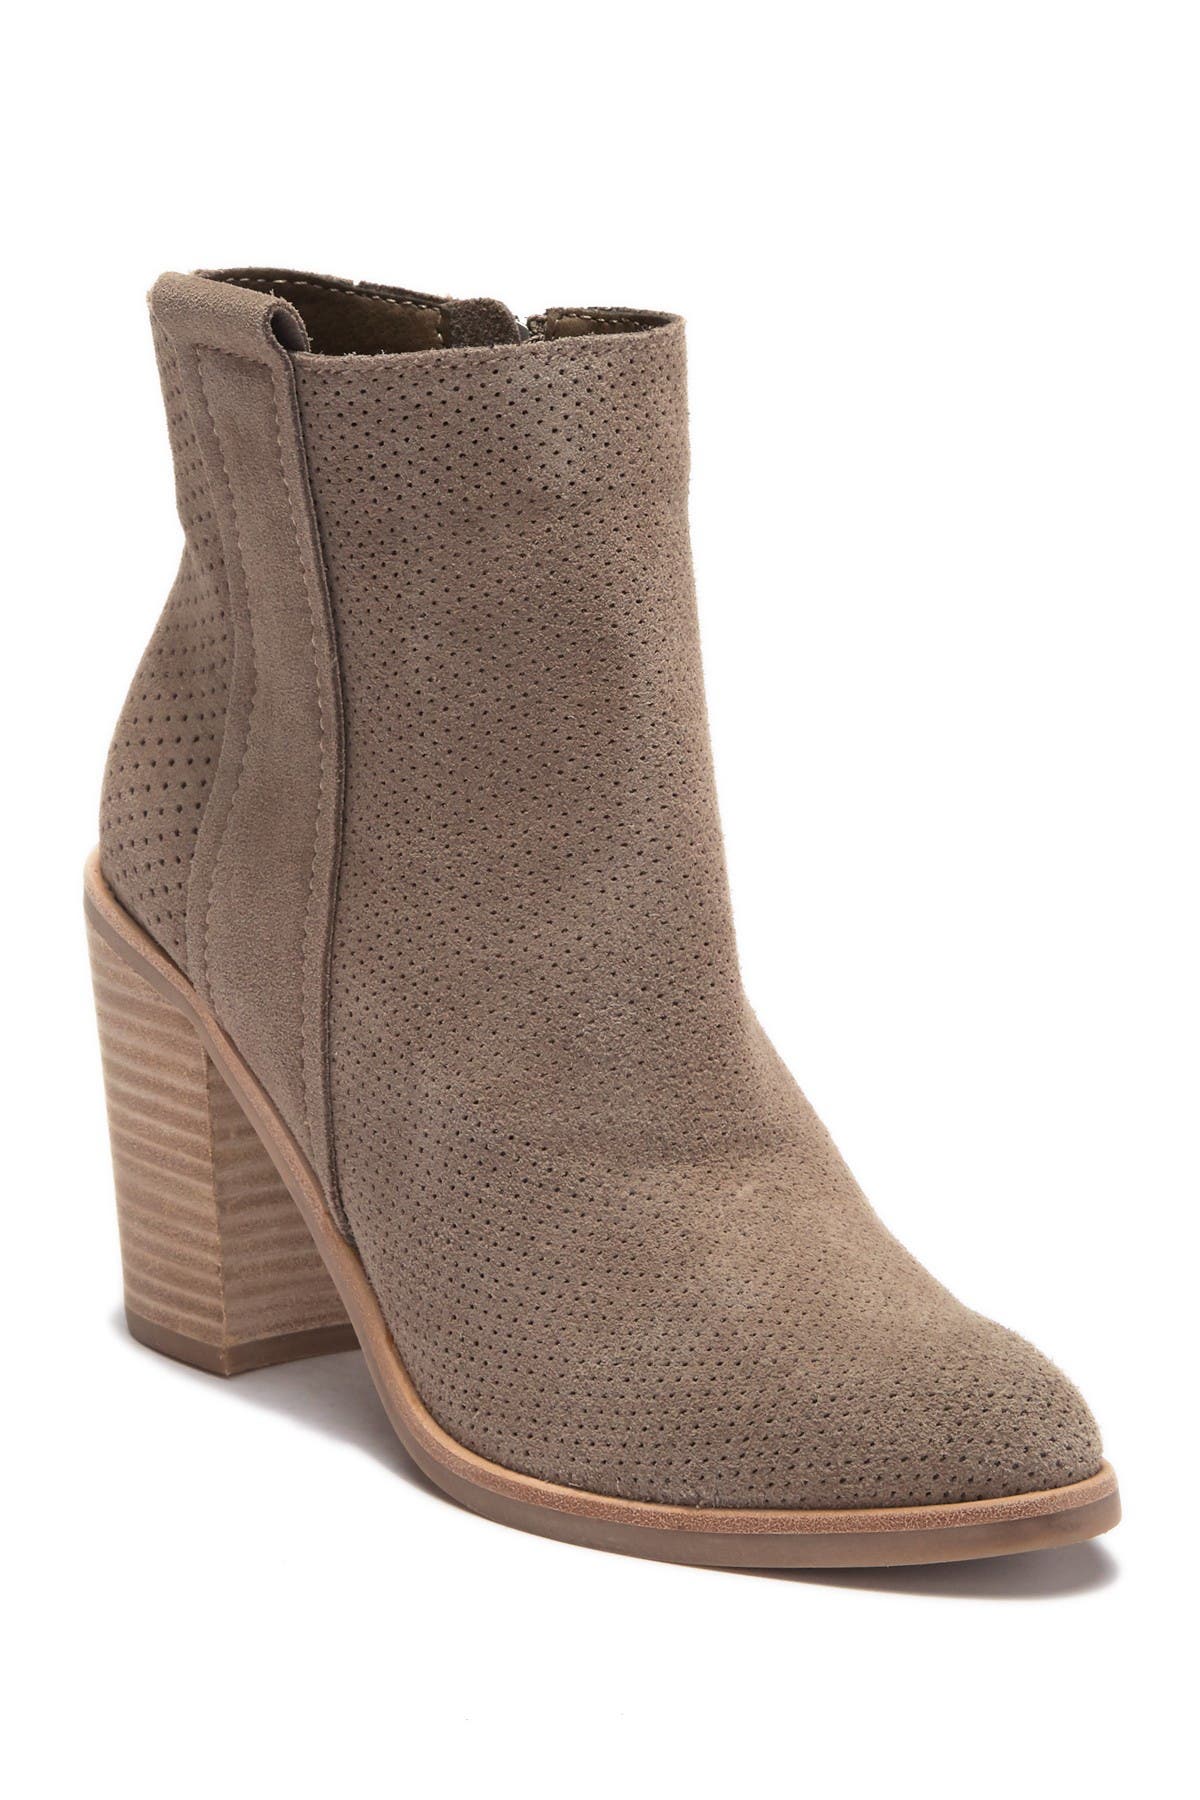 dolce vita perforated bootie